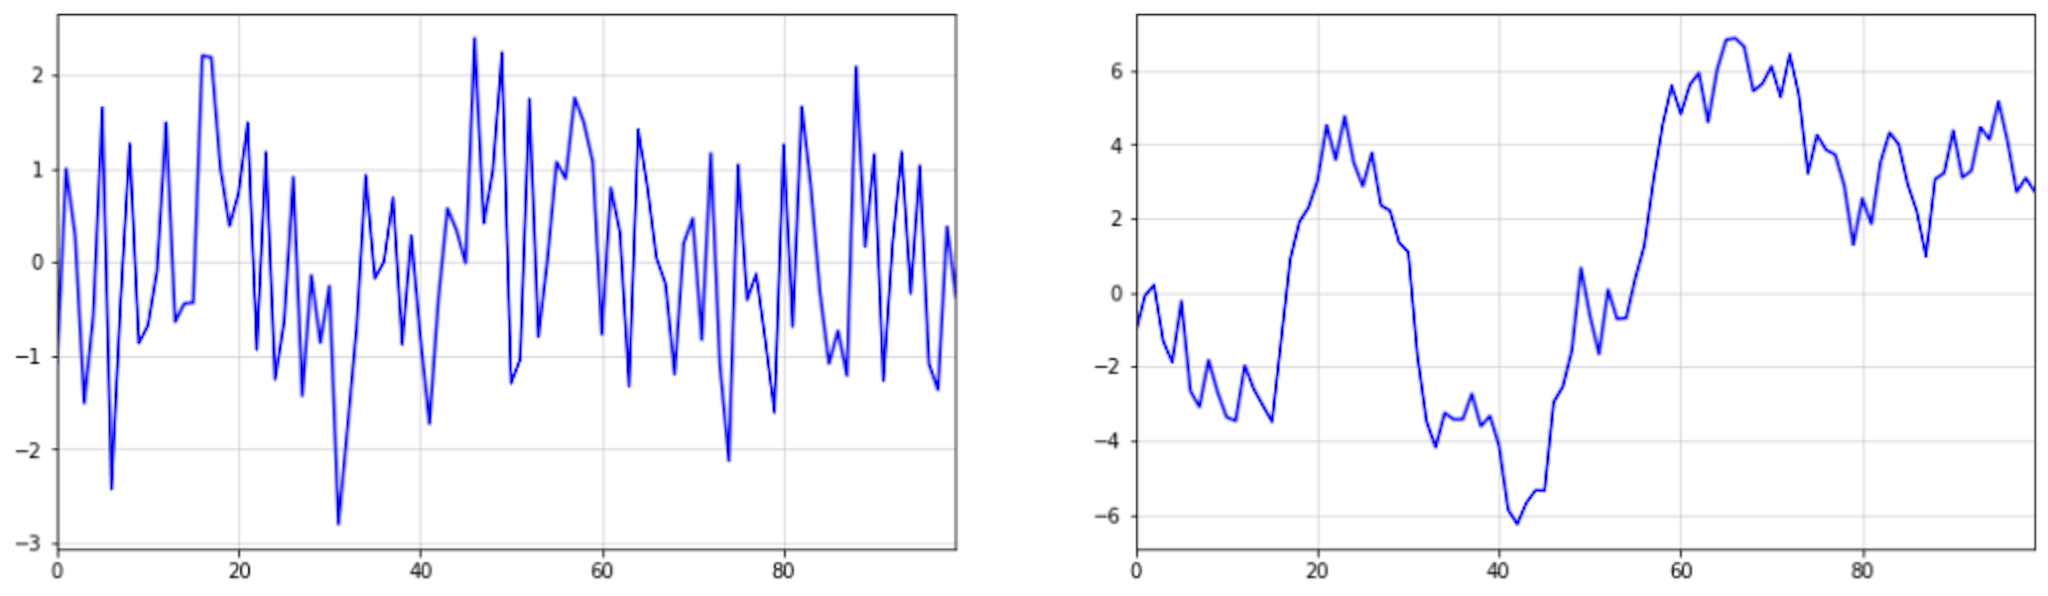 White noise time-series (left) and corresponding integrated time-series (right). Both time-series are related via the simple difference operator and its inverse.